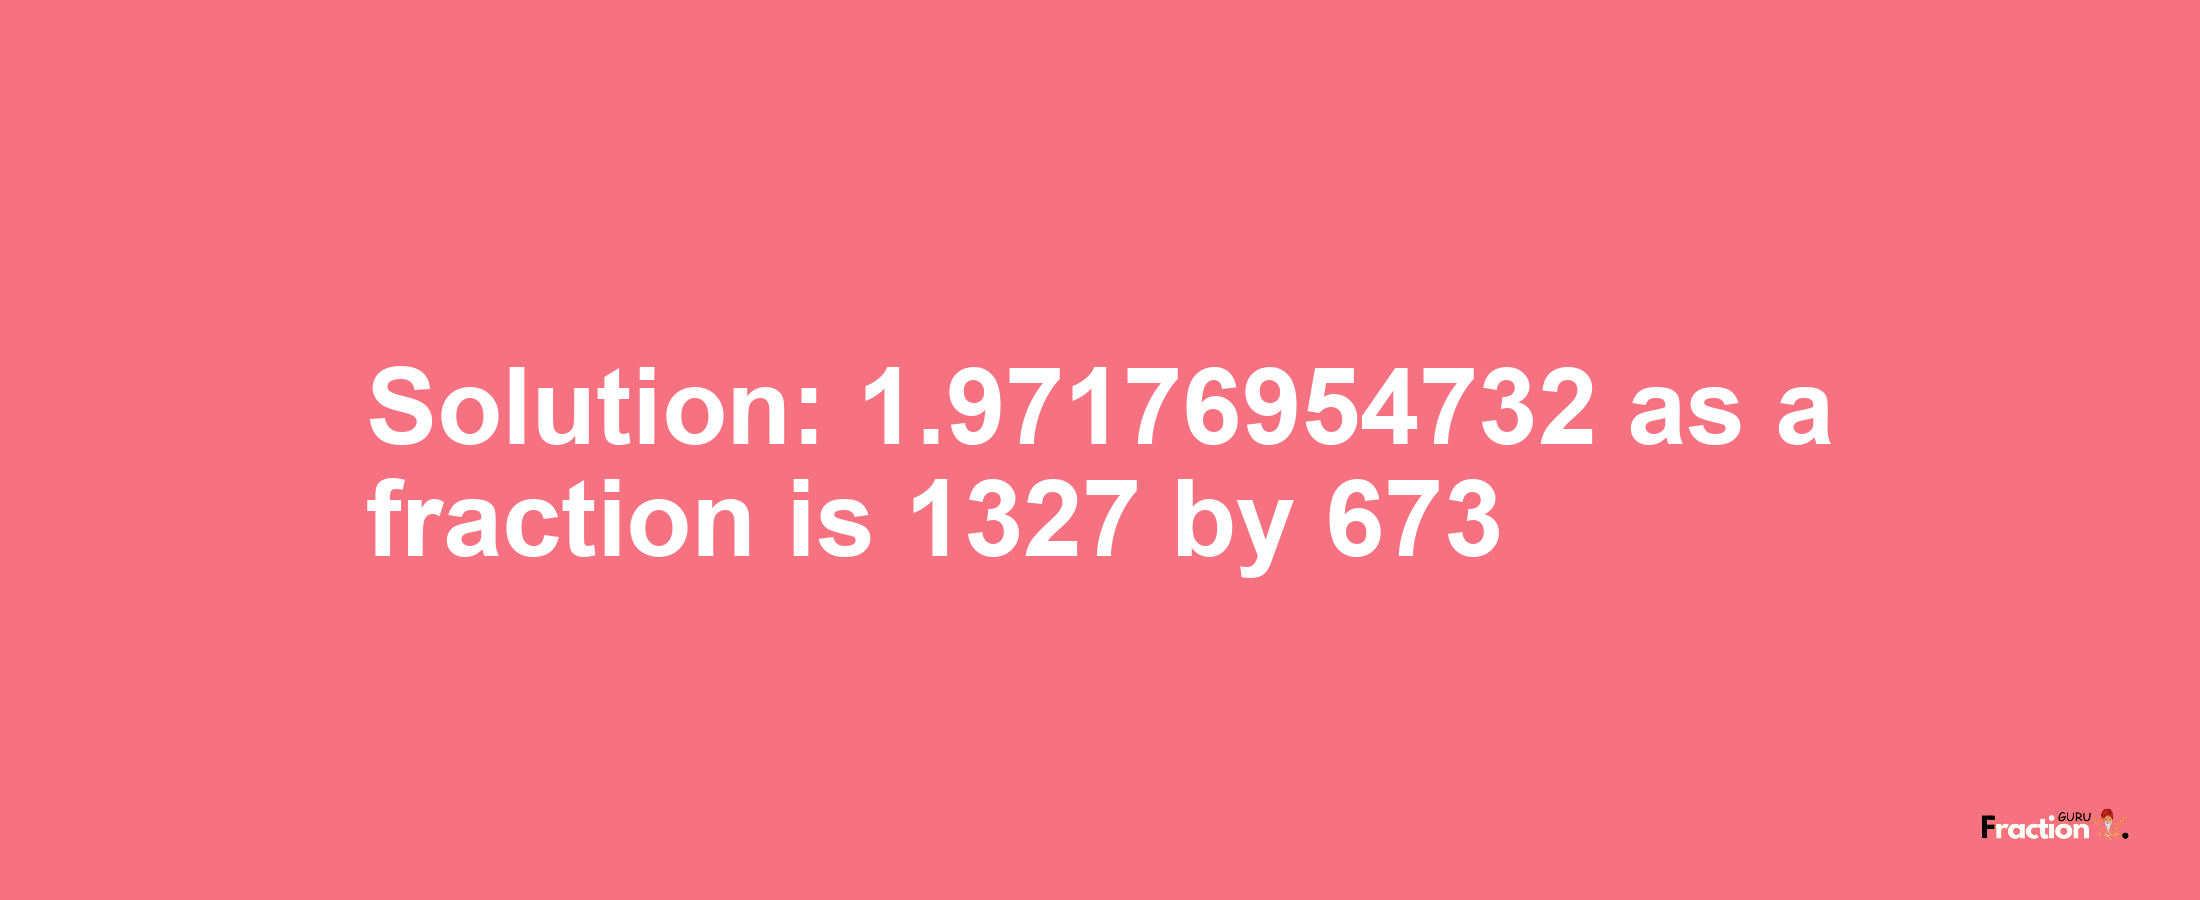 Solution:1.97176954732 as a fraction is 1327/673